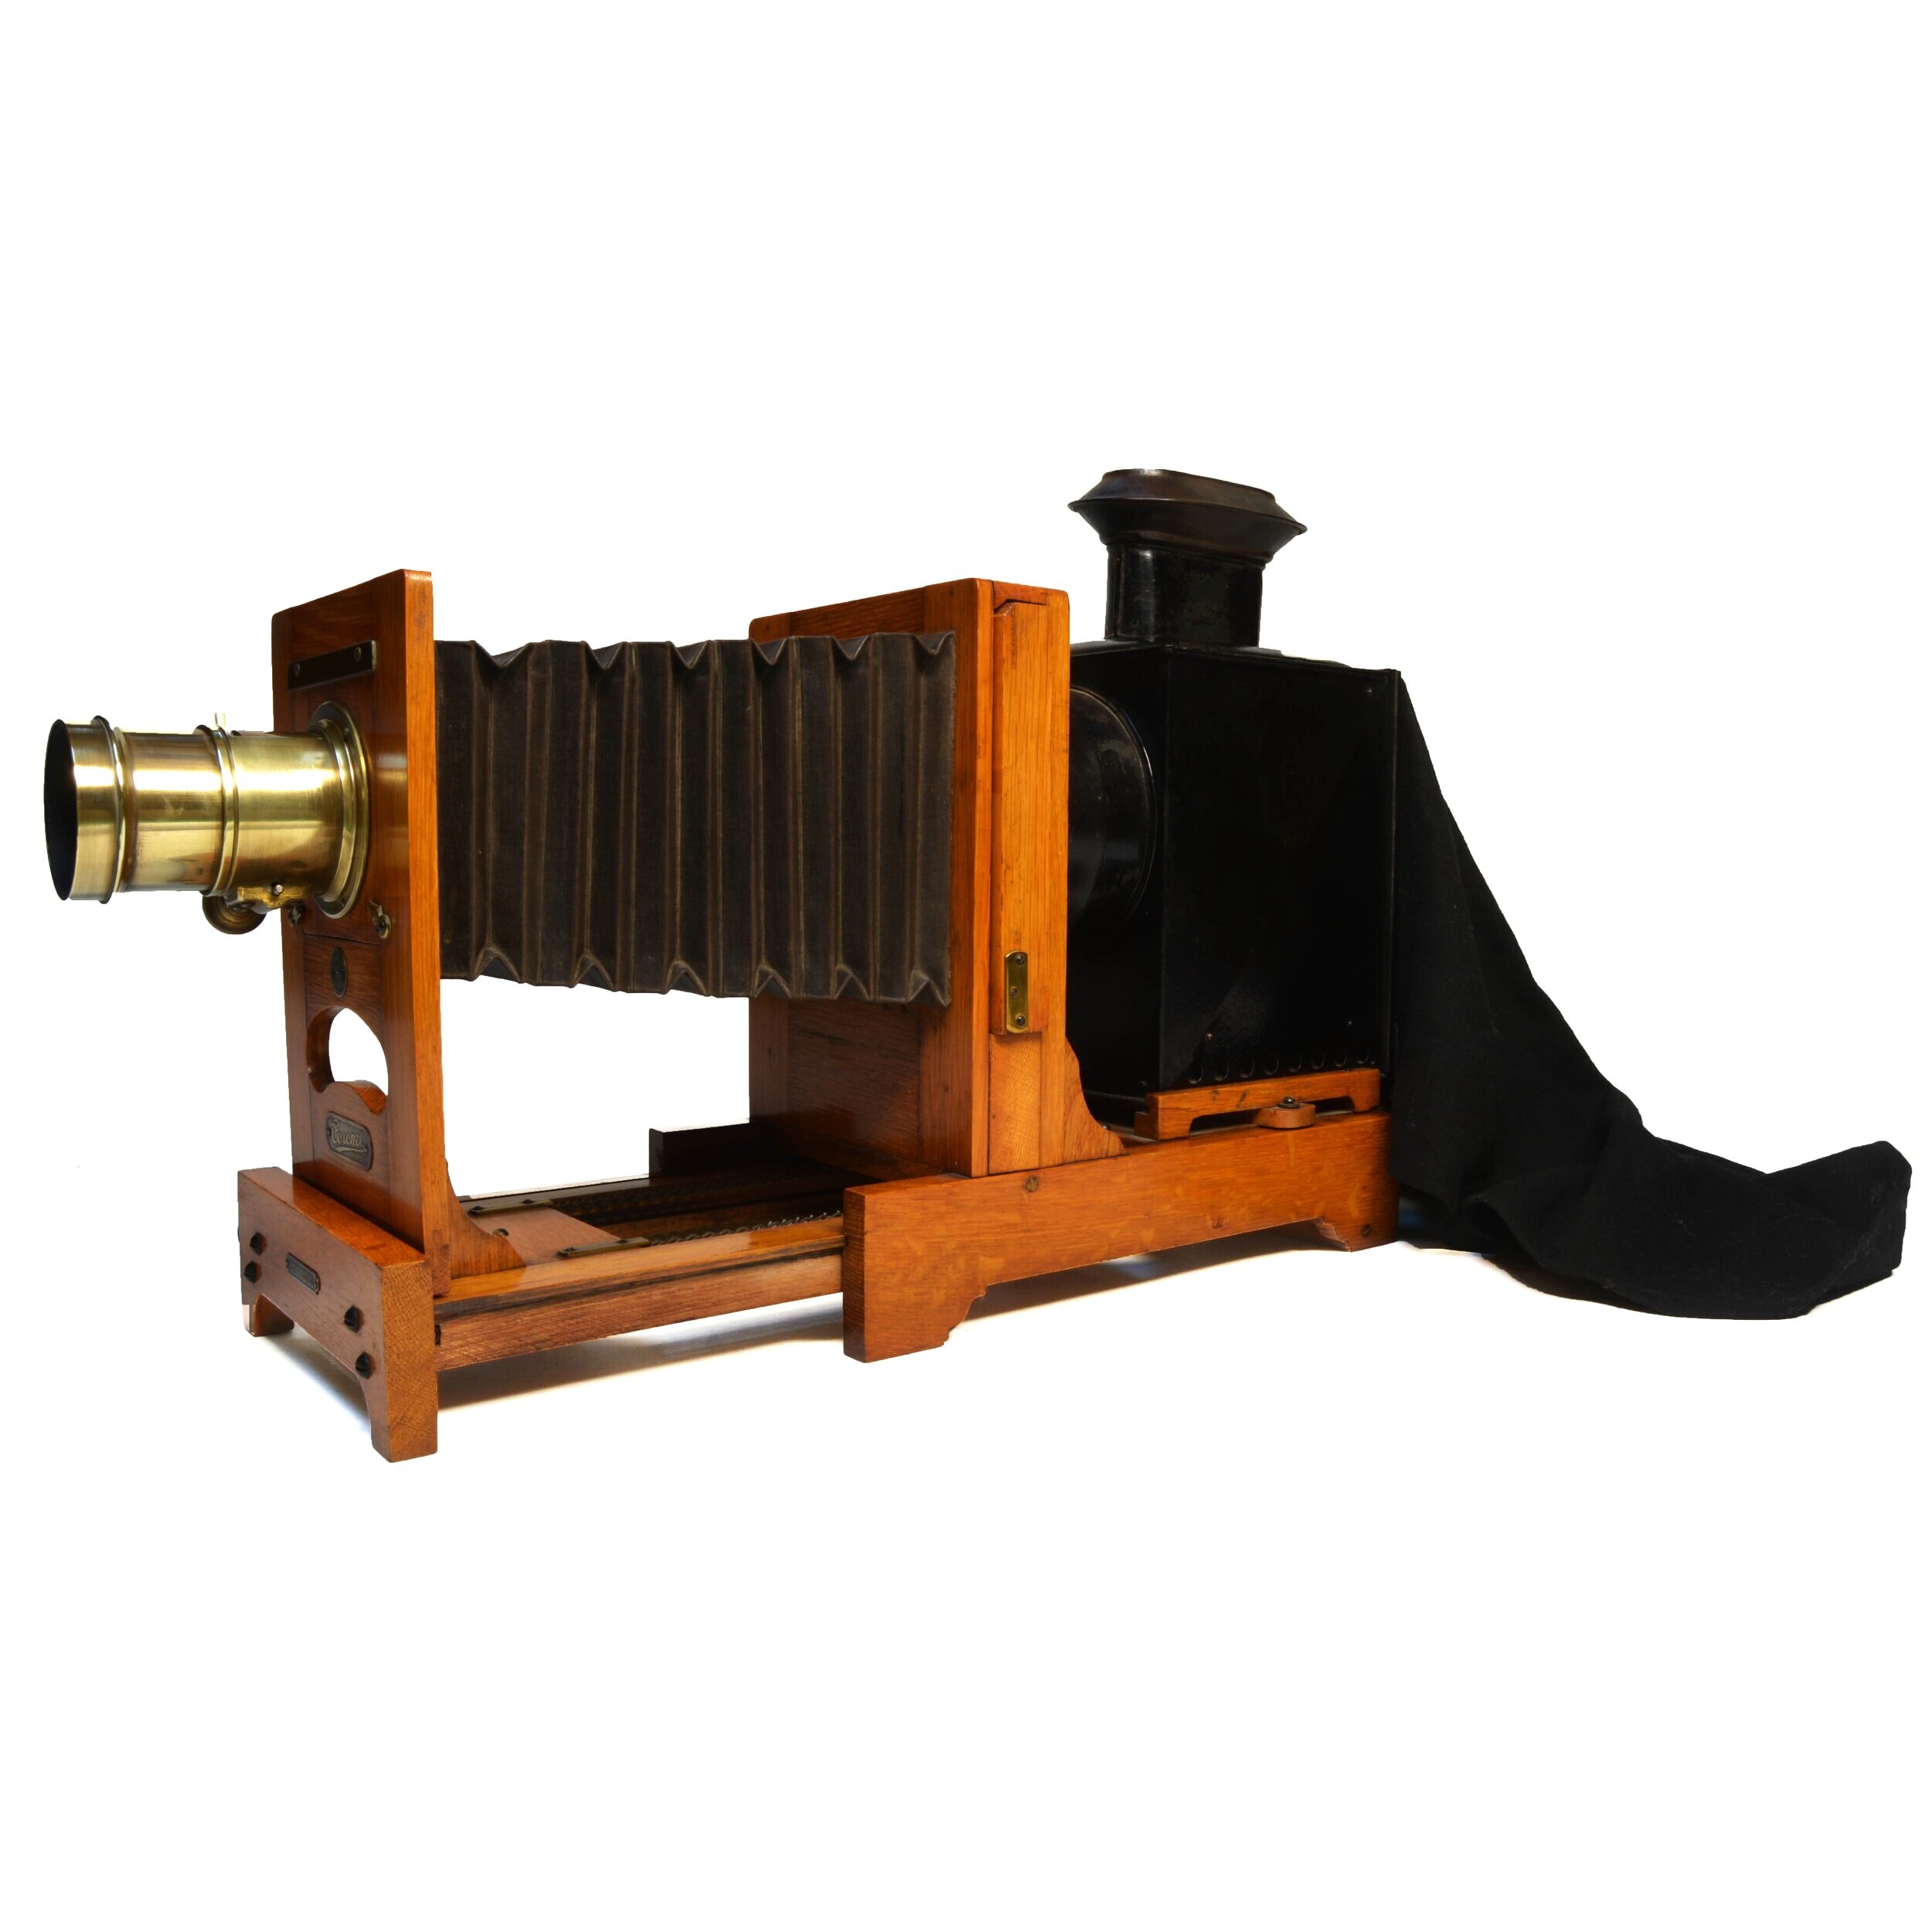 Butcher and Sons 'Coronet' Horizontal Enlarger